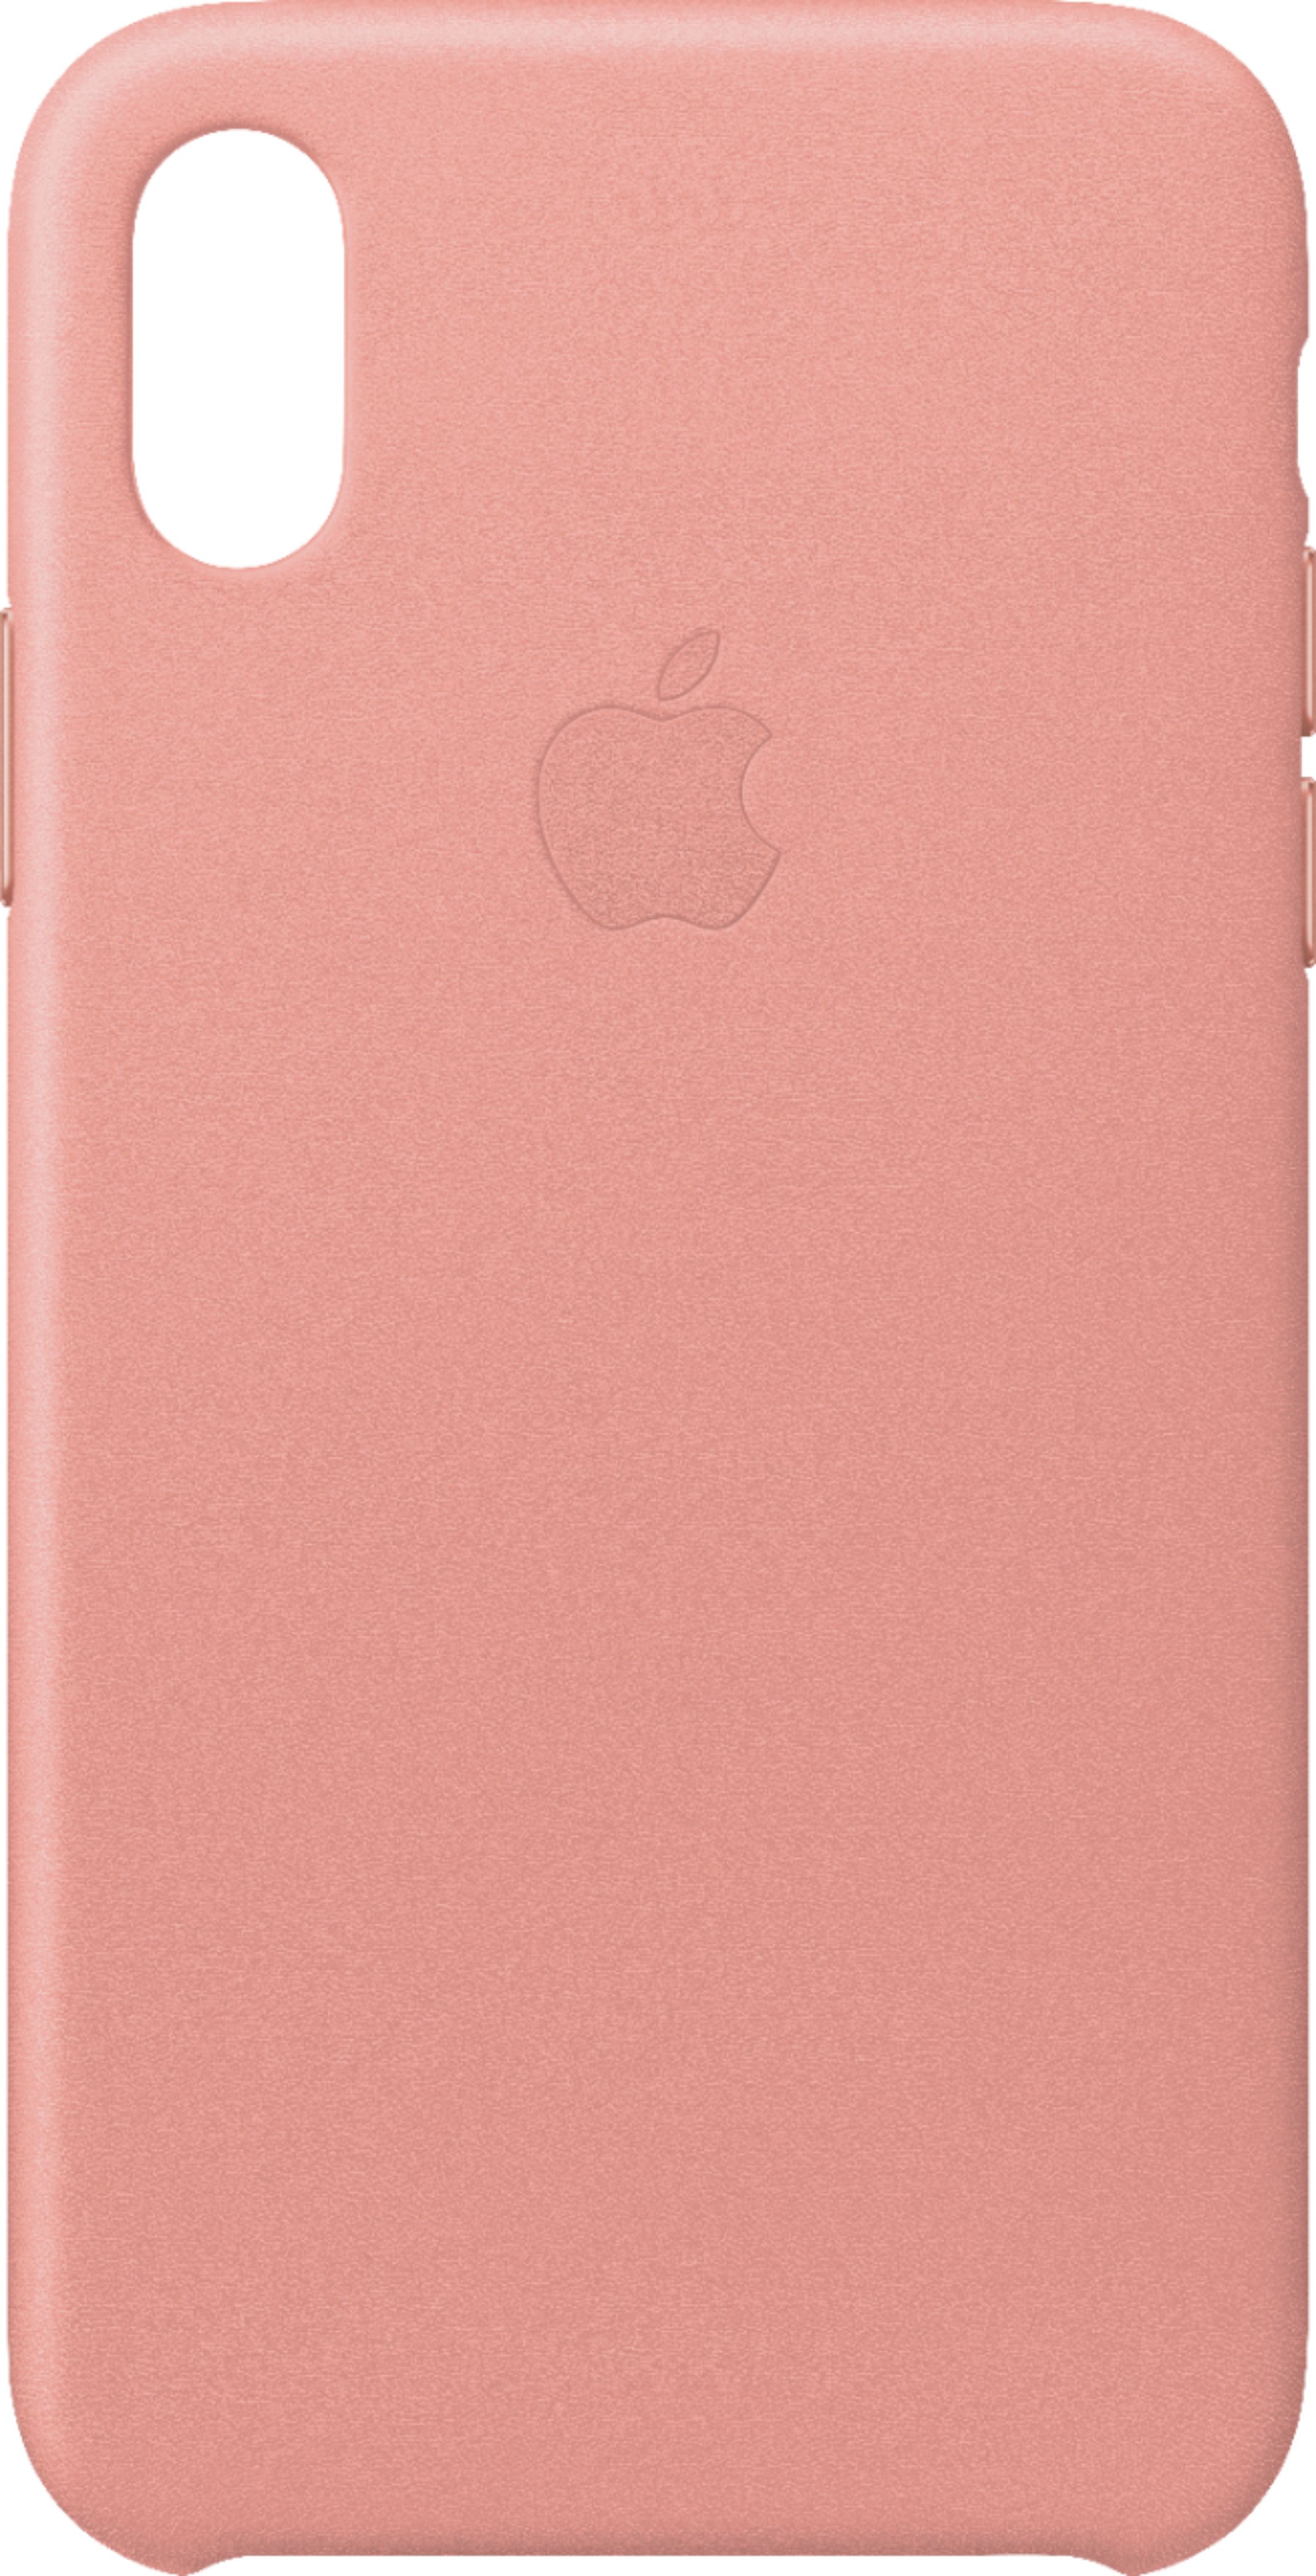 nickel Volcanic silhouette Best Buy: Apple iPhone® X Leather Case Soft Pink MRGH2ZM/A